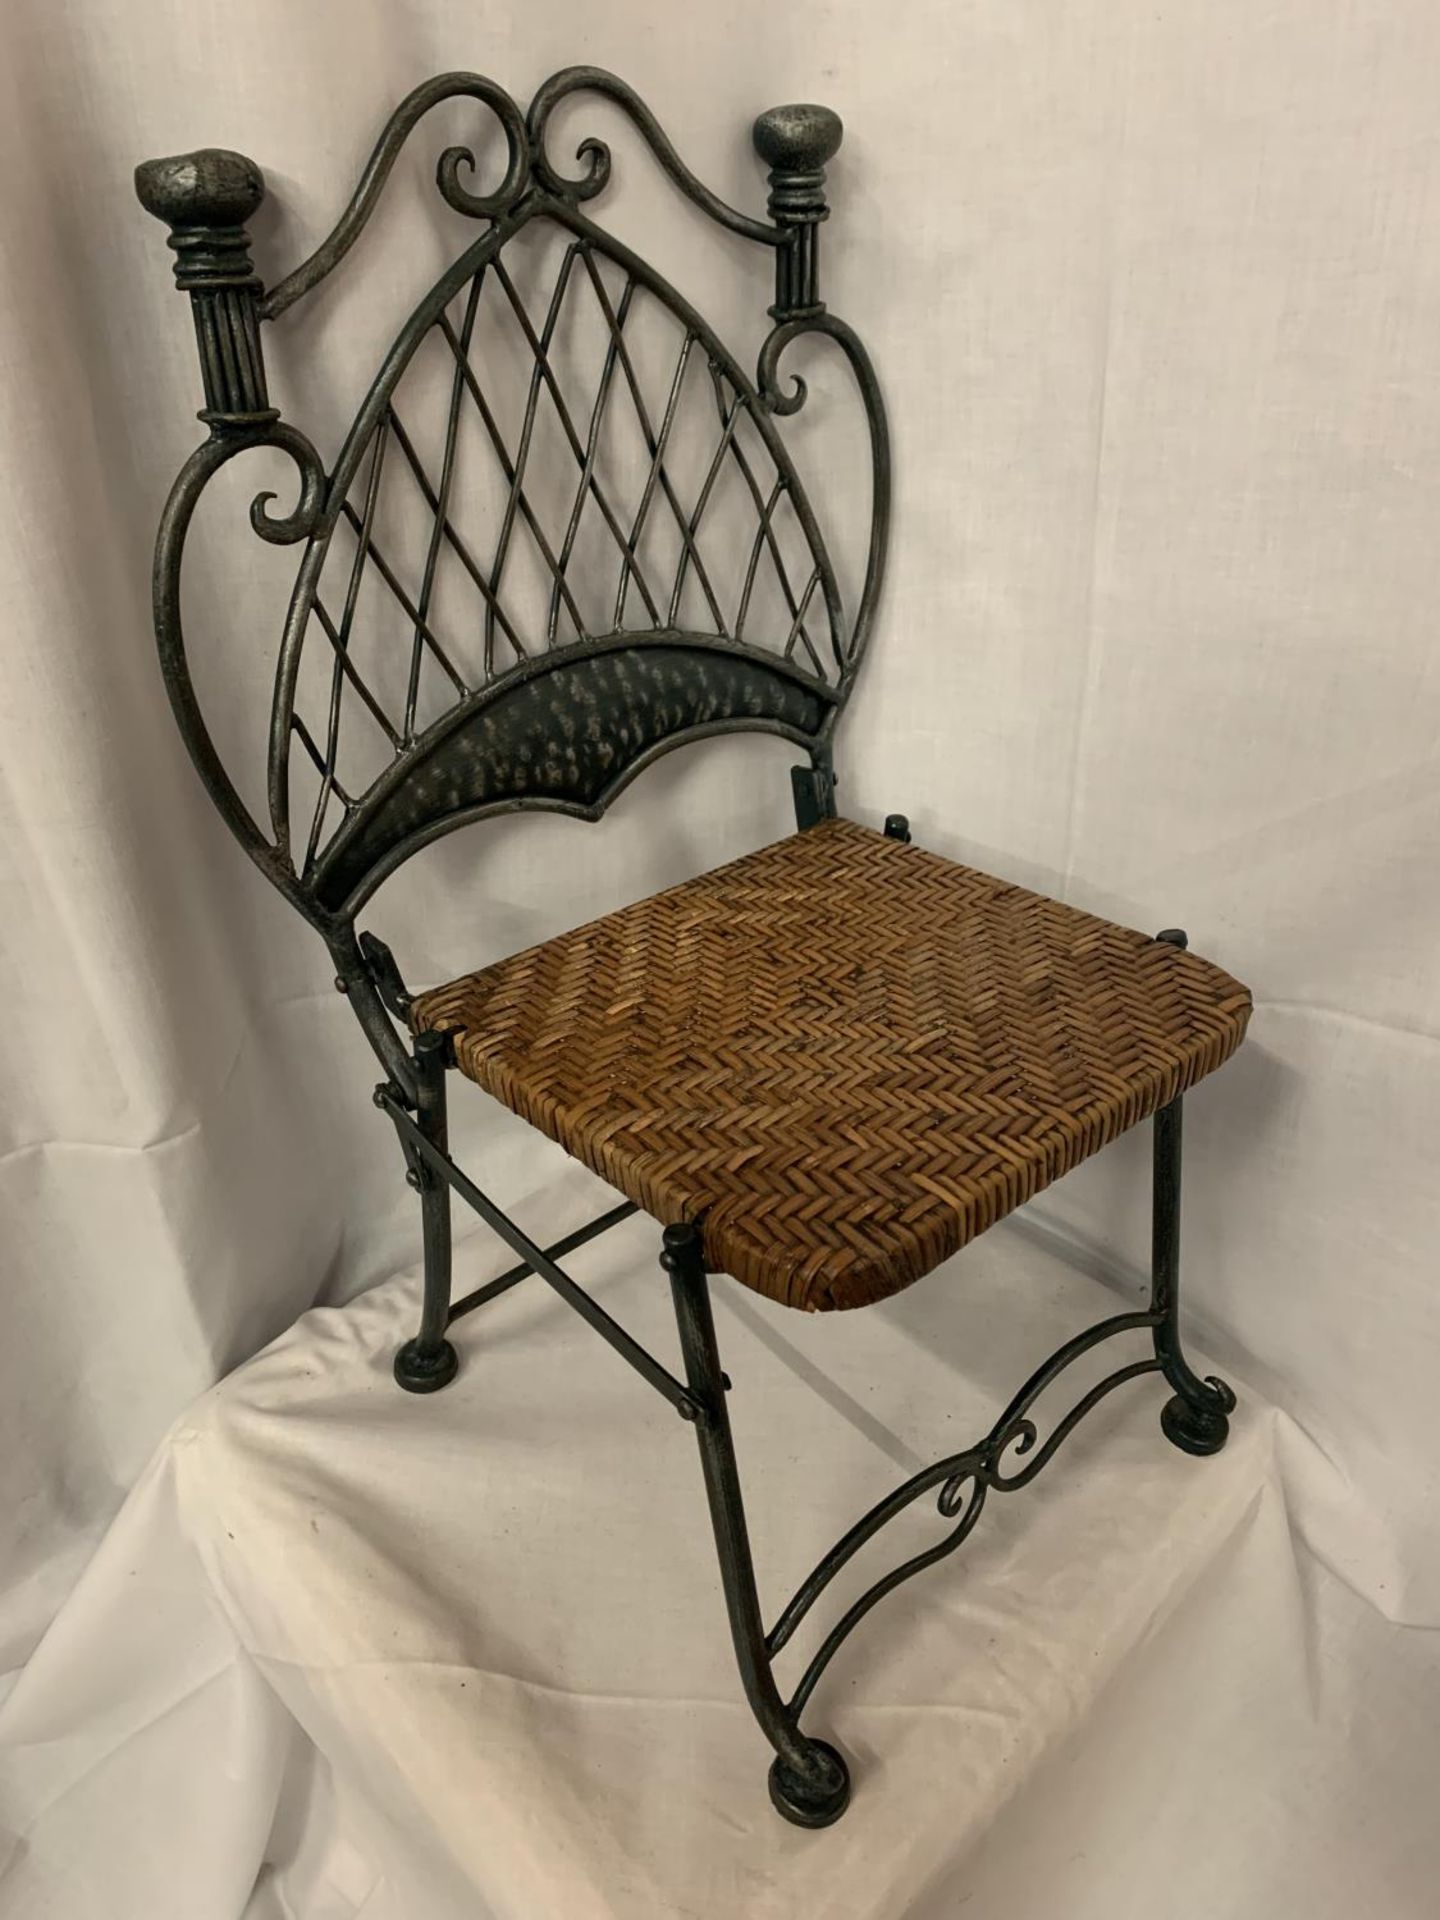 A VINTAGE VERY HEAVY WROUGHT IRON CHILDRENS CHAIR WITH A WOVEN SEAT